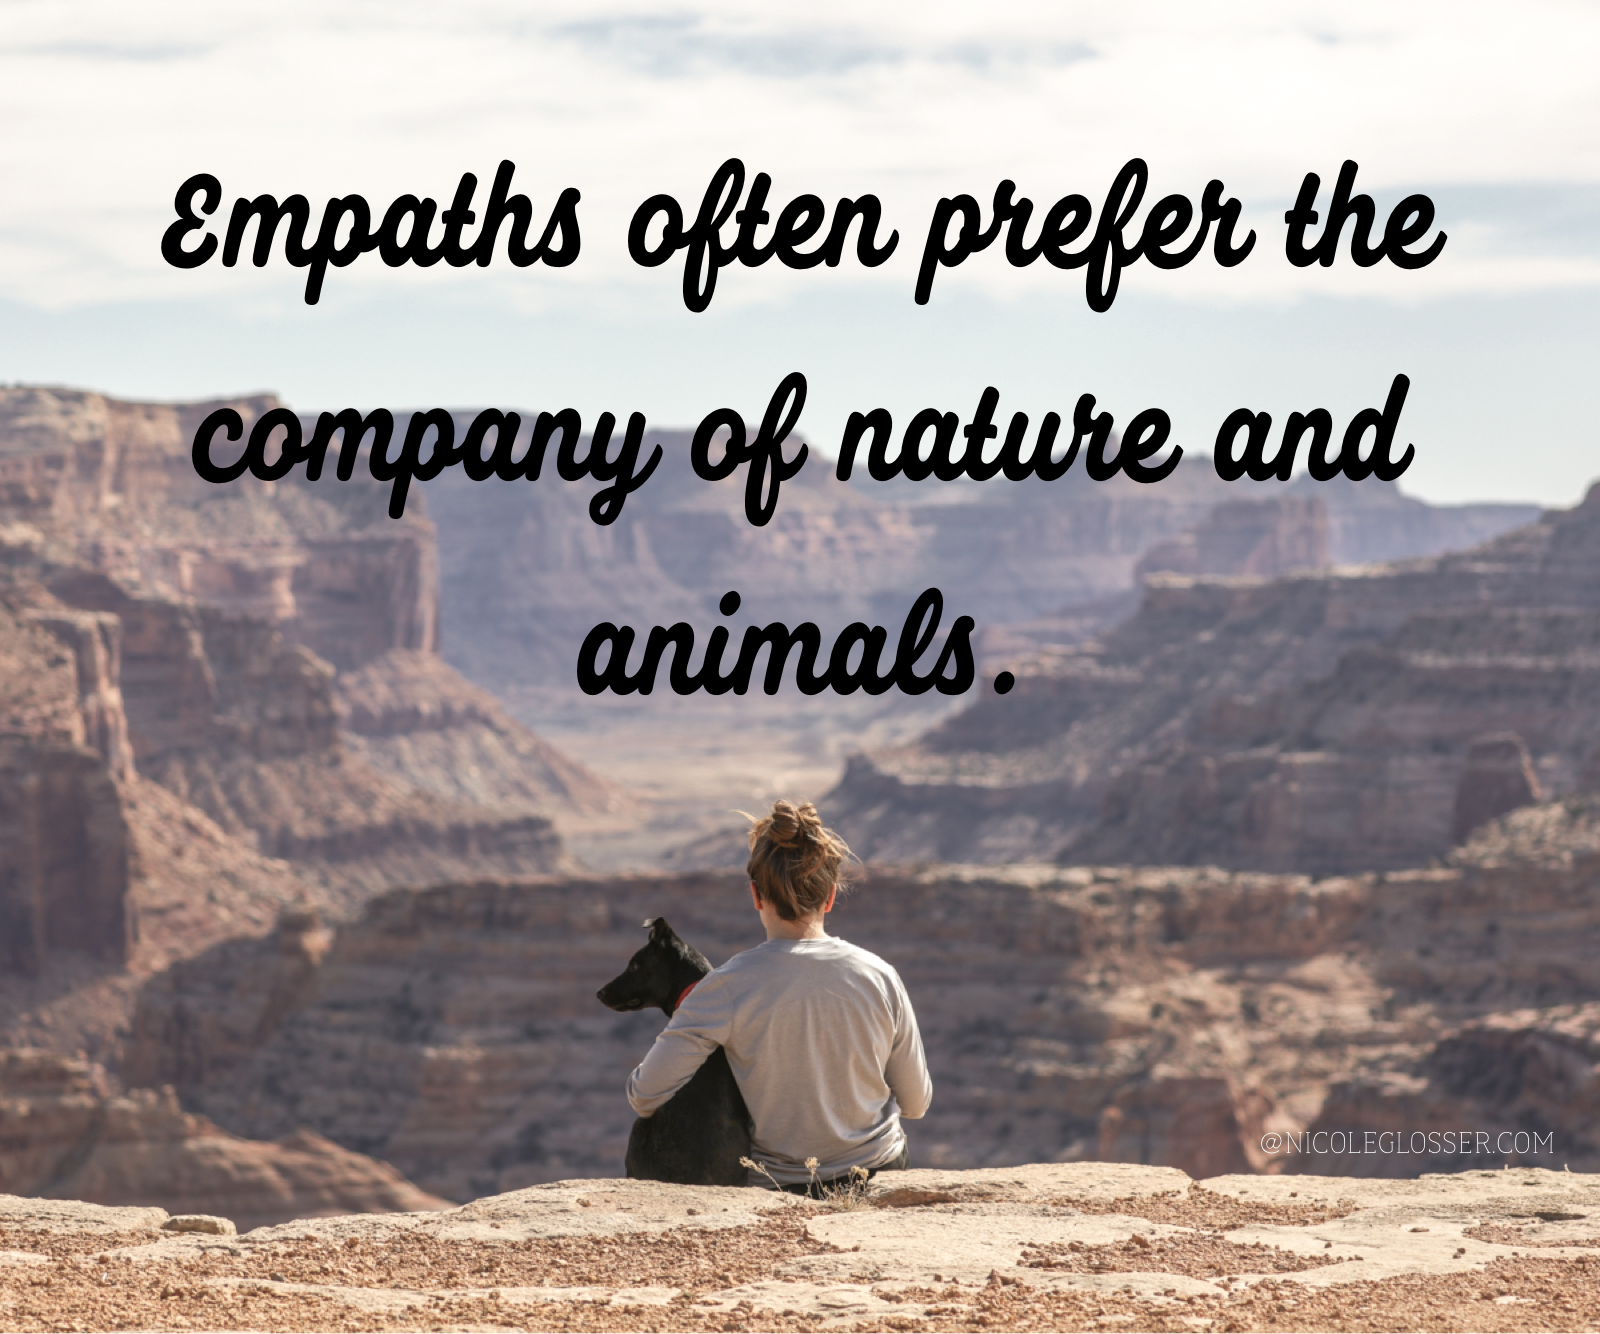 What is an Empath?